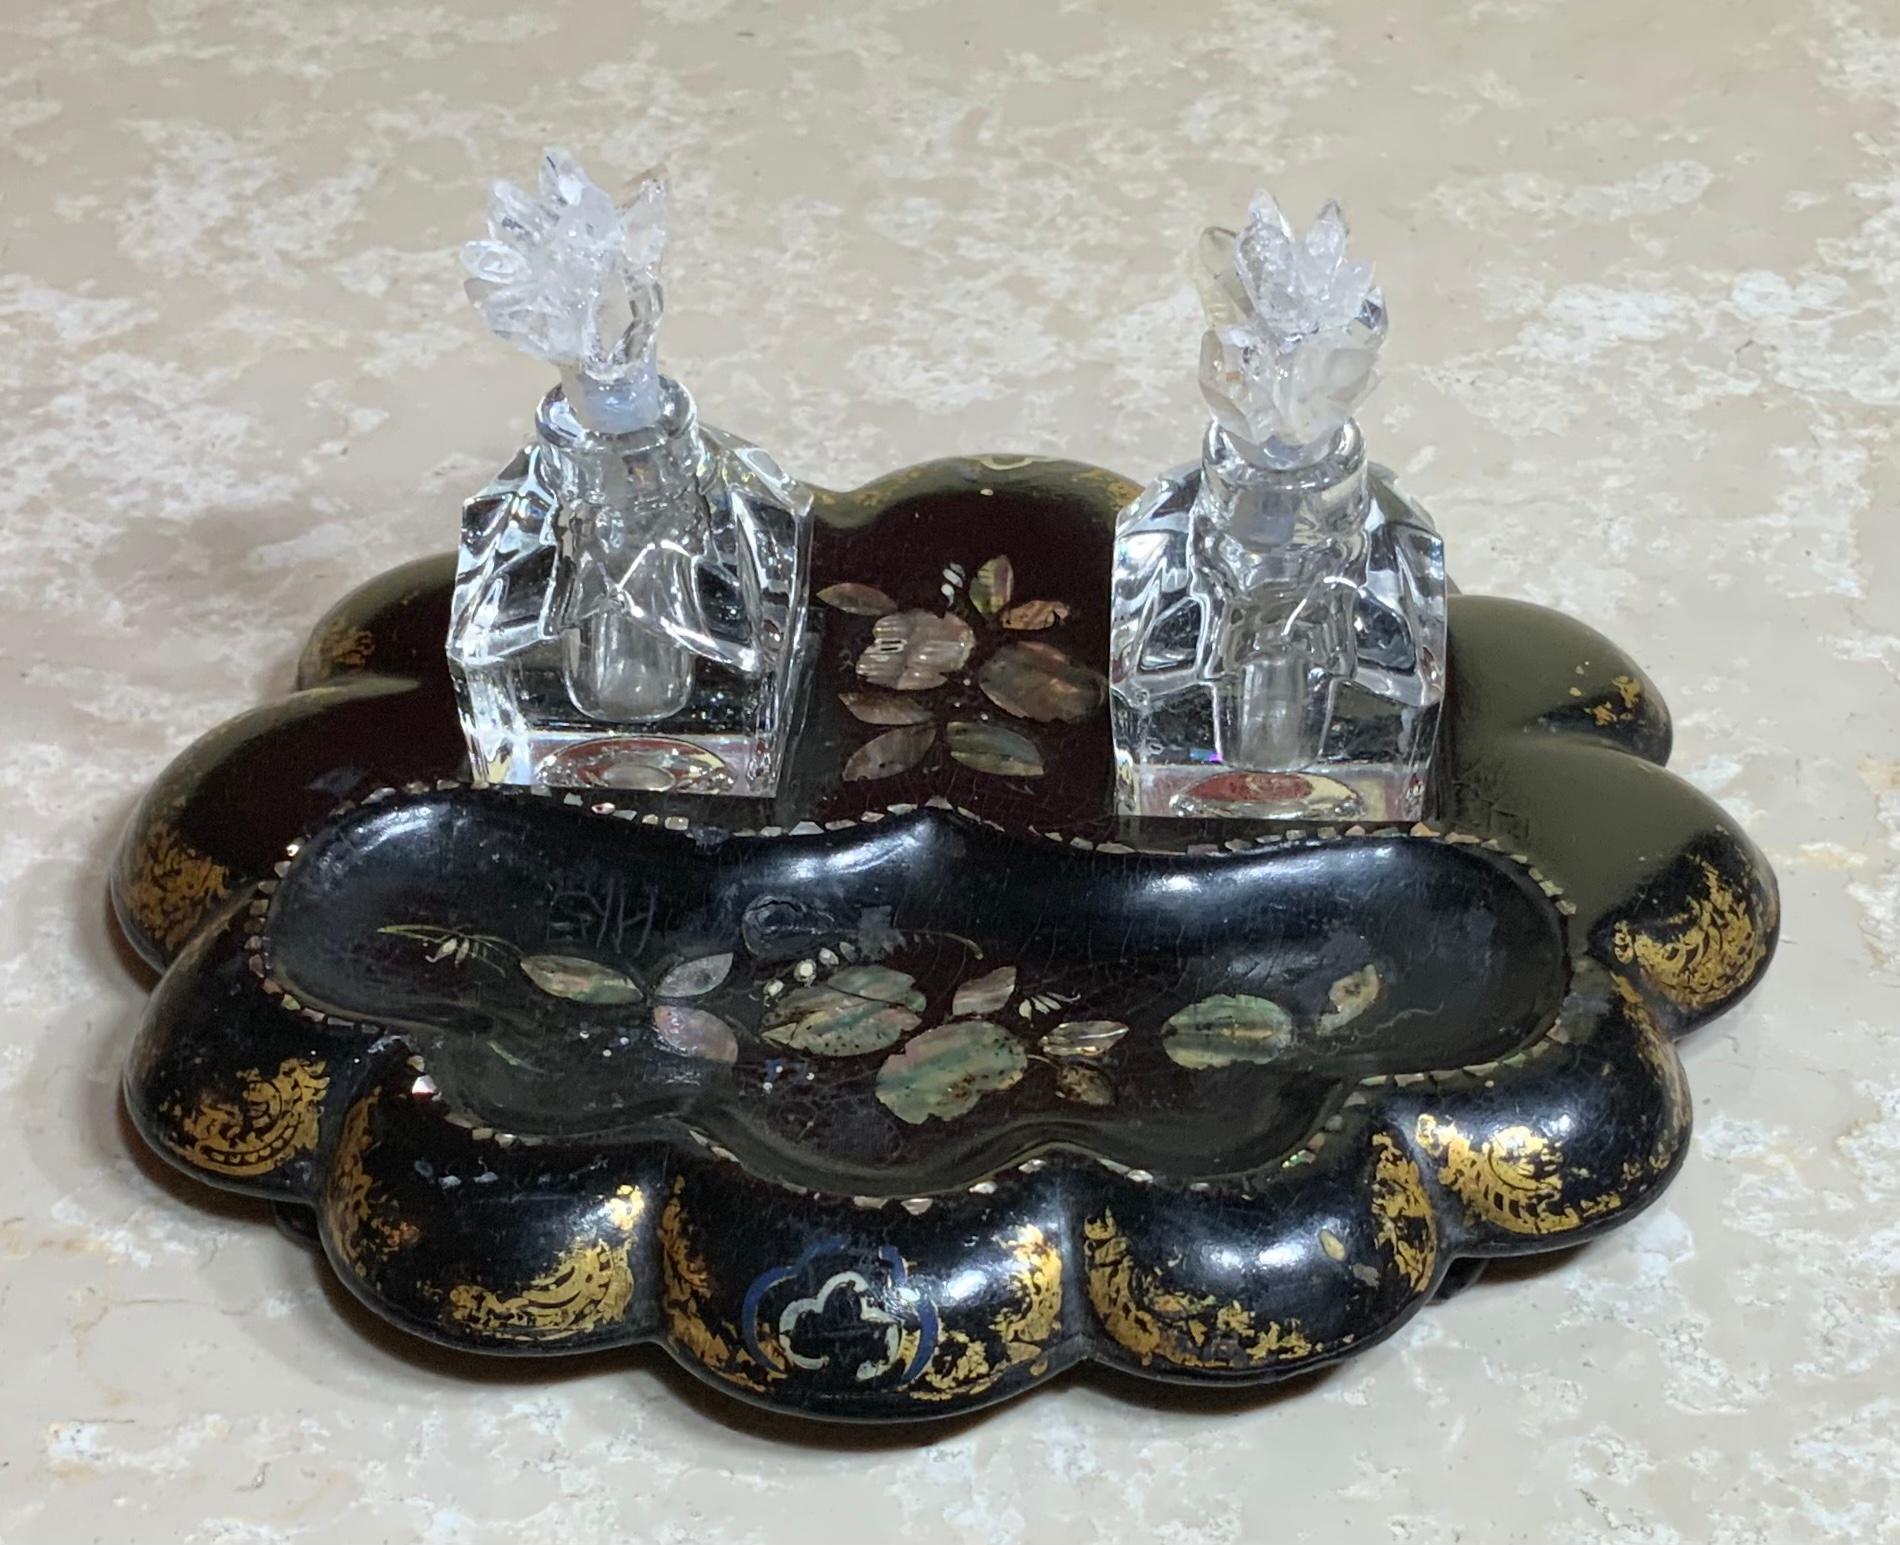 19th century papier mâché and mother-of-pearl with carved inkwells ,artistically hand made tops made of genuine crystal quartz.